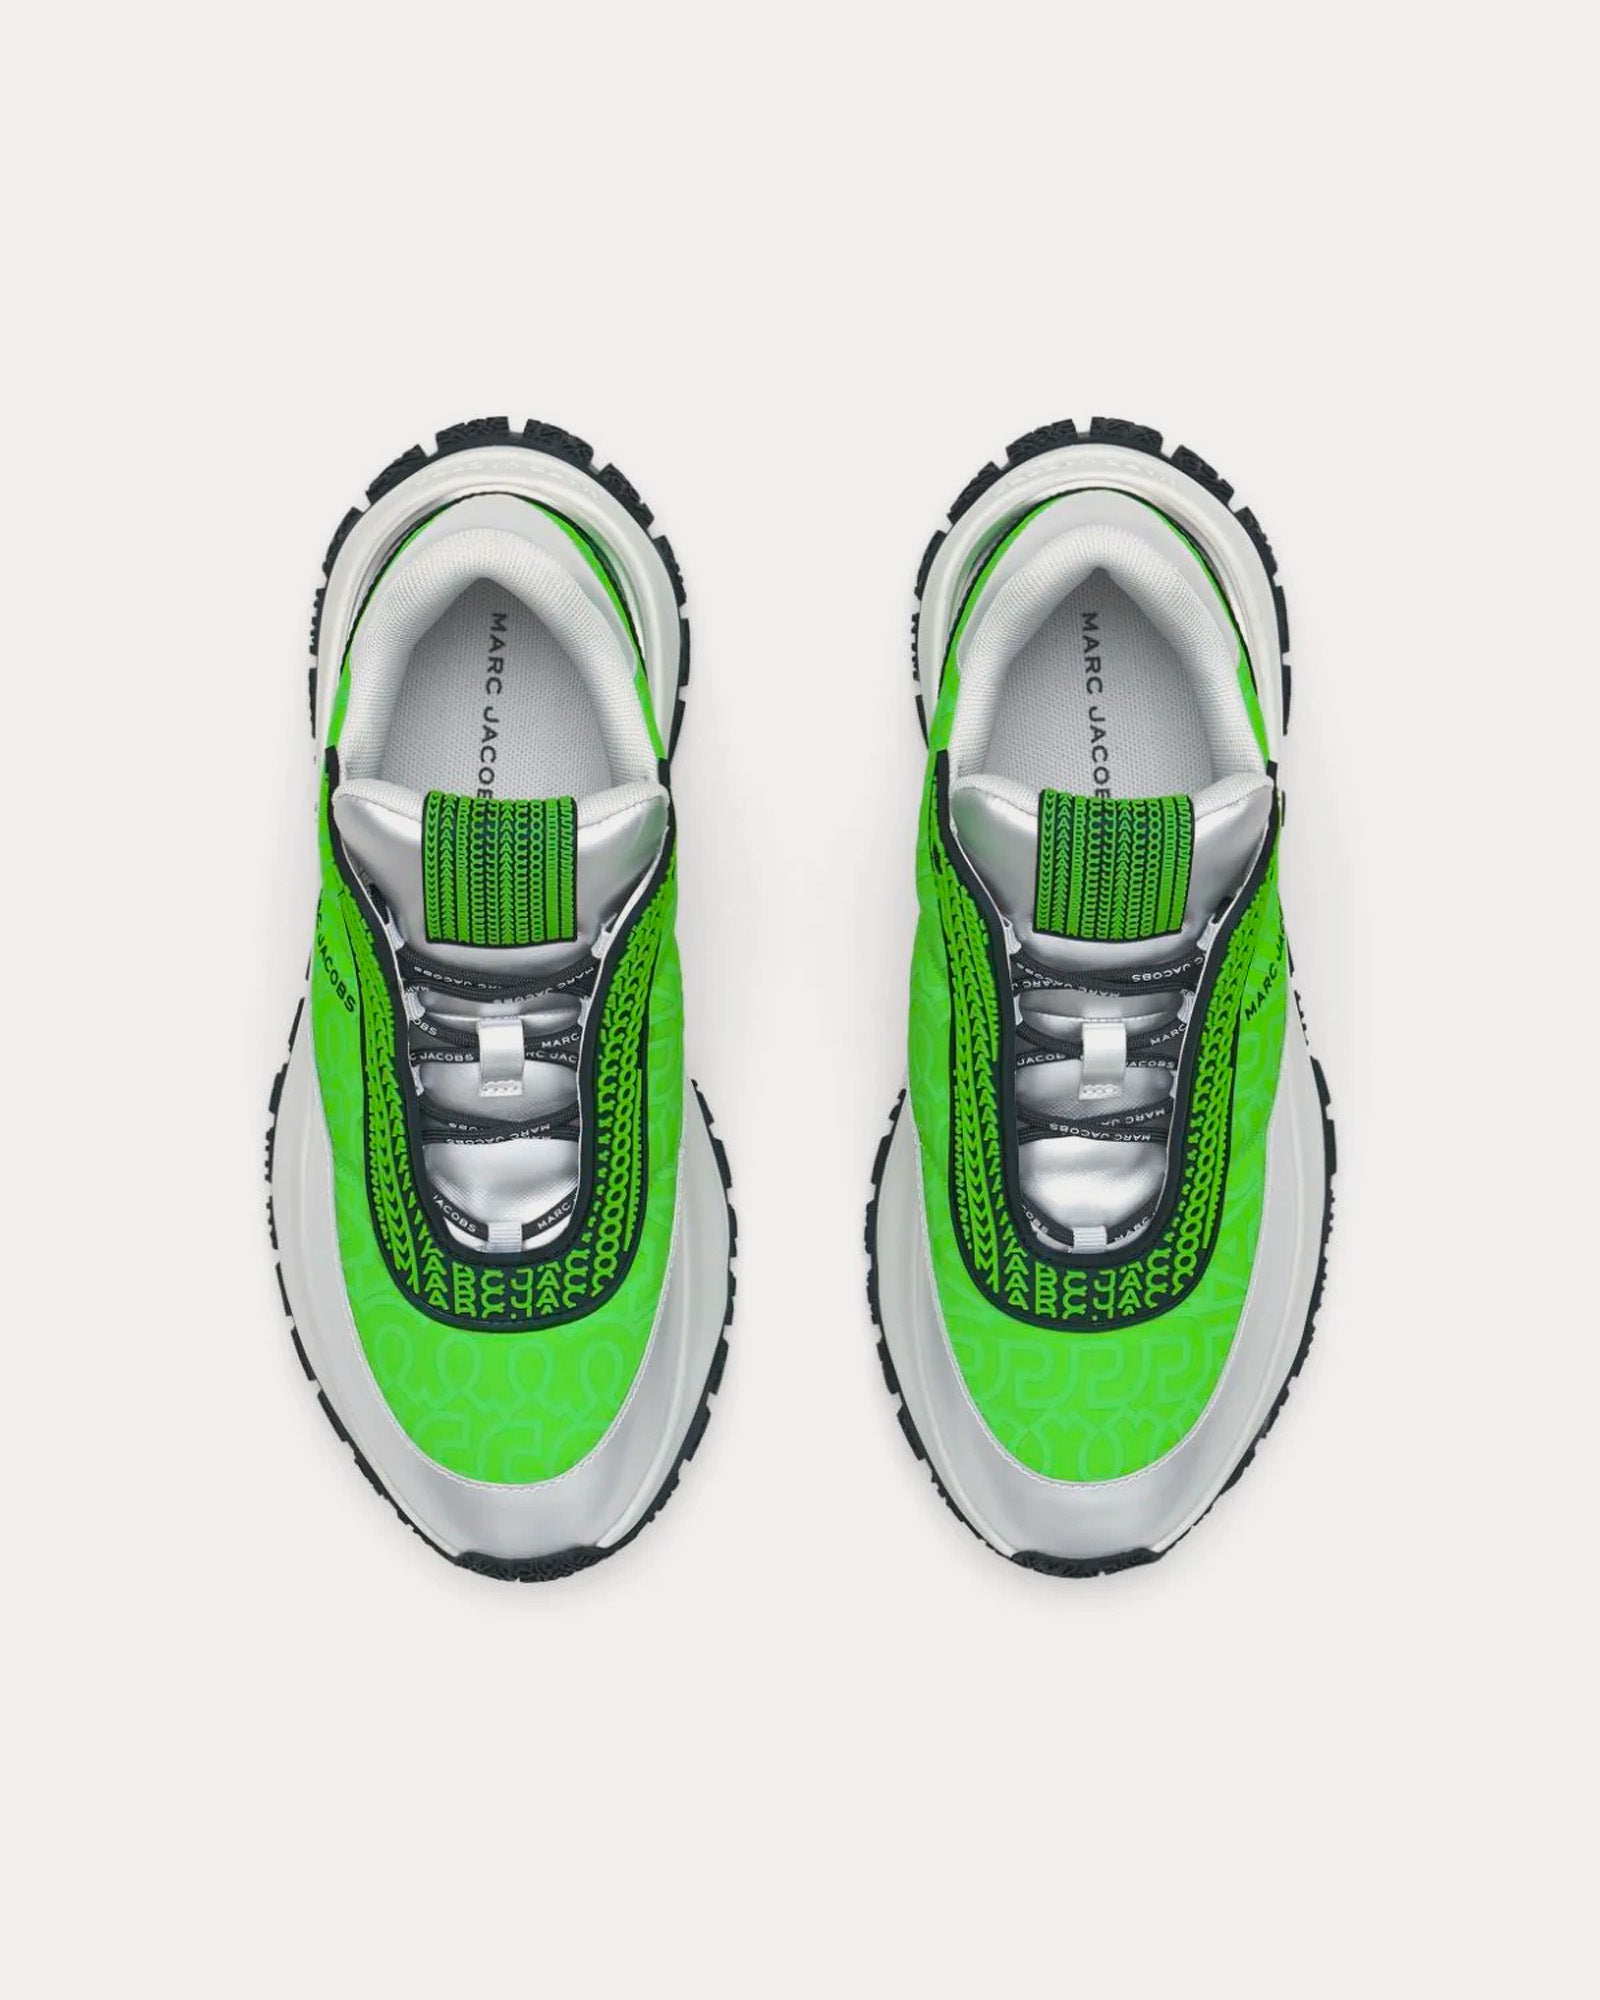 Marc Jacobs - The Monogram Lazy Runner Silver / Green  Low Top Sneakers